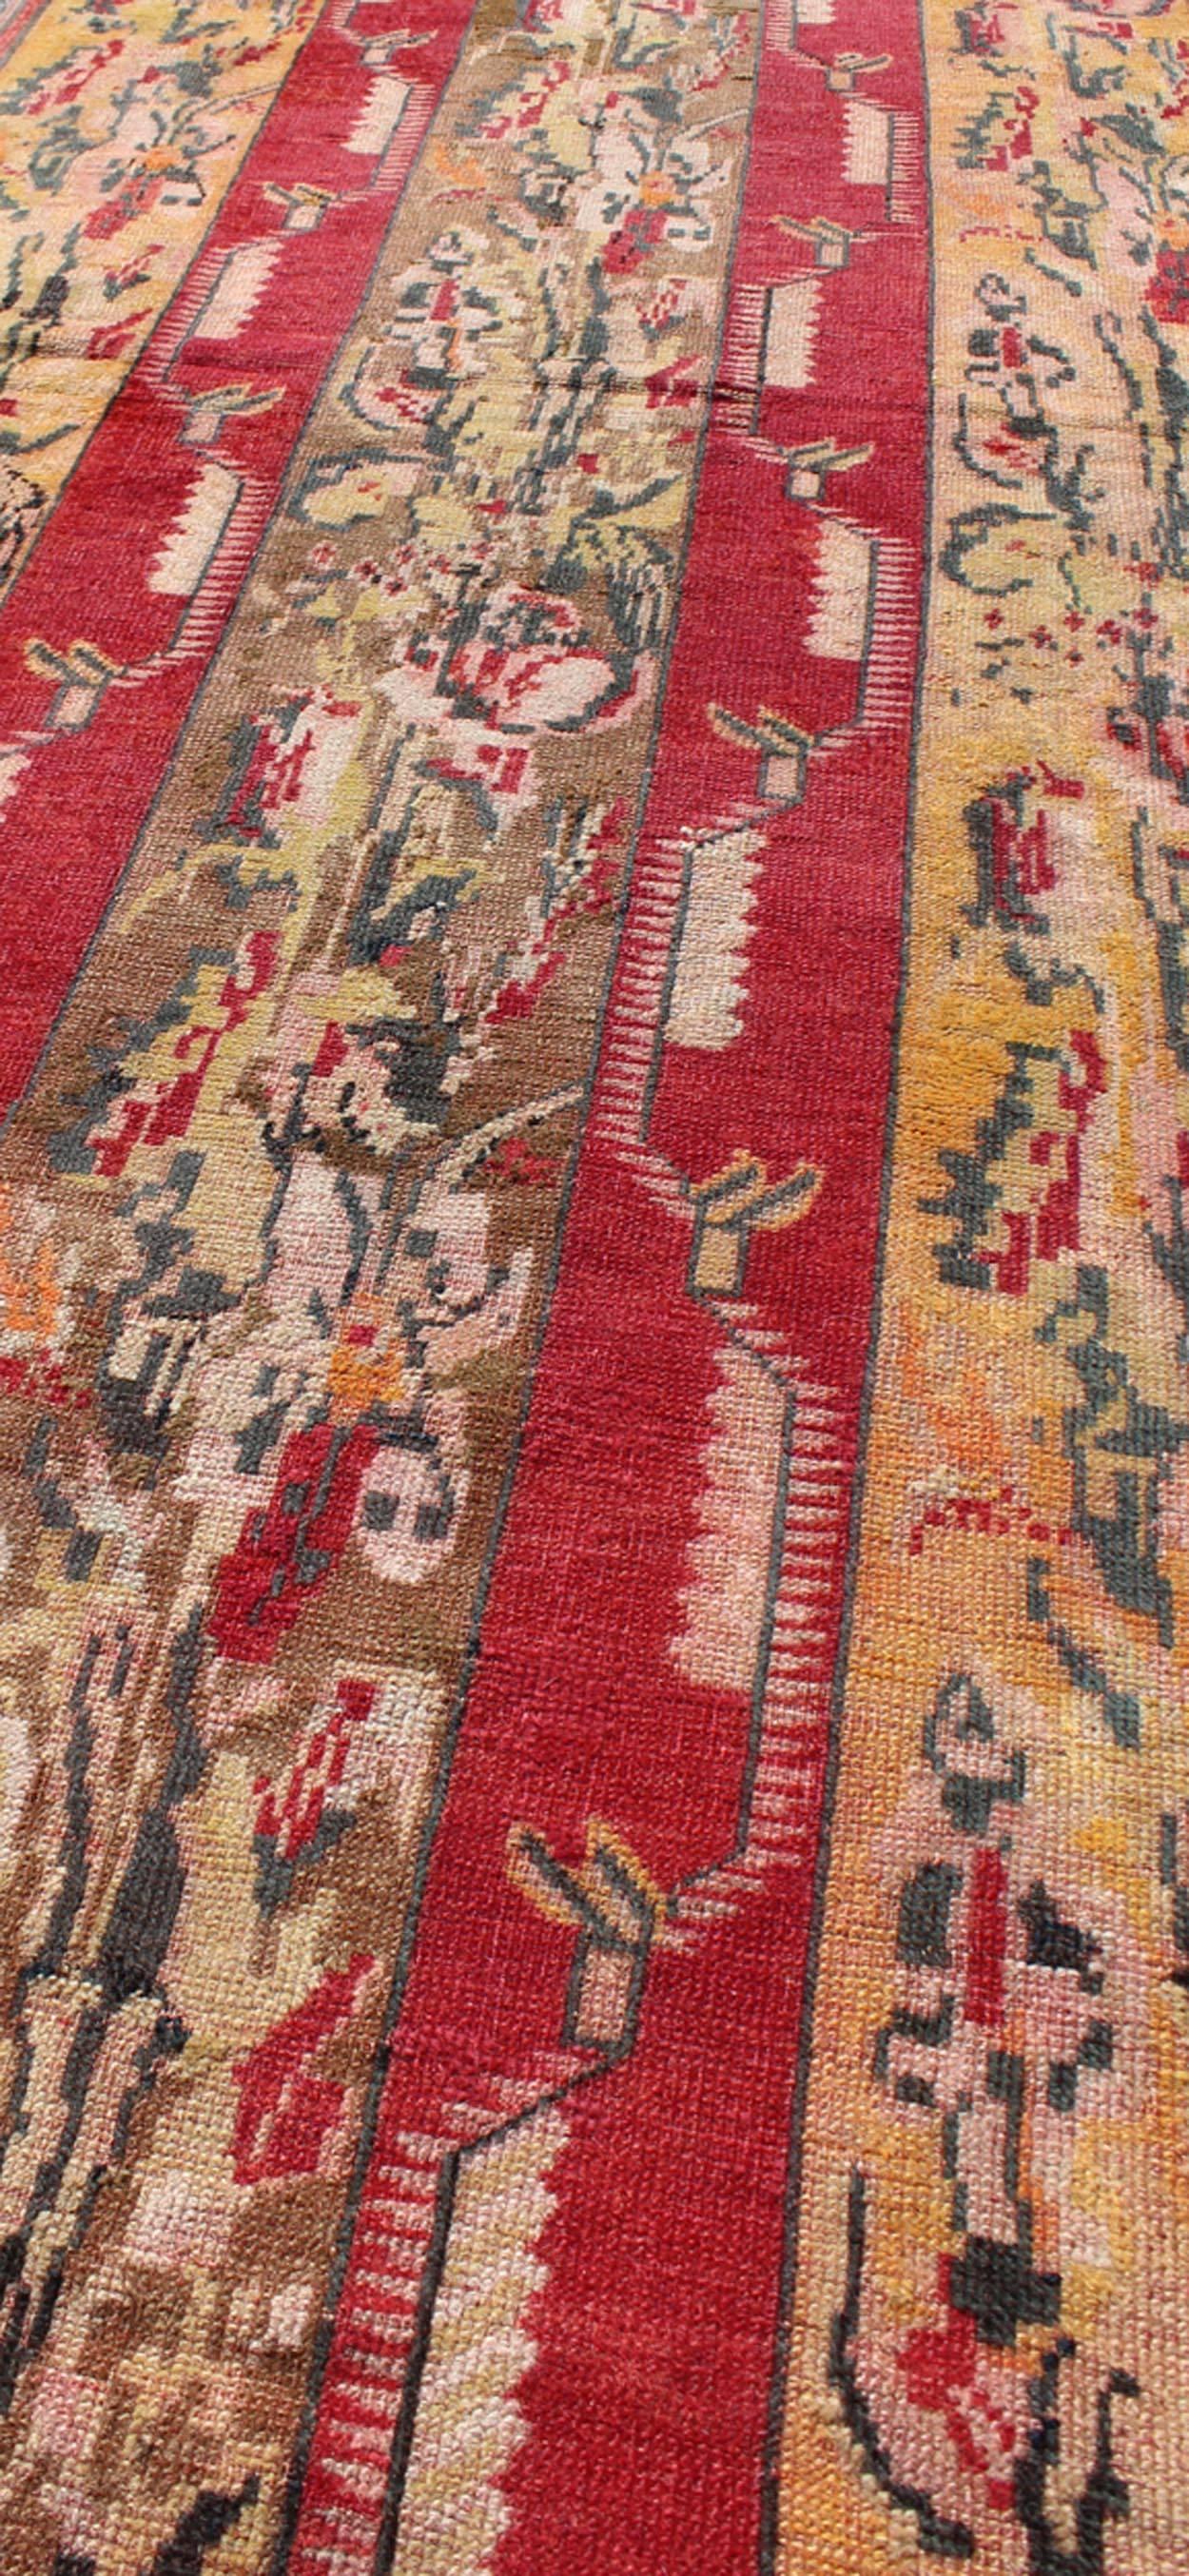 Antique Turkish Oushak Runner with Saffron Yellow, Light Brown and Red  In Good Condition For Sale In Atlanta, GA